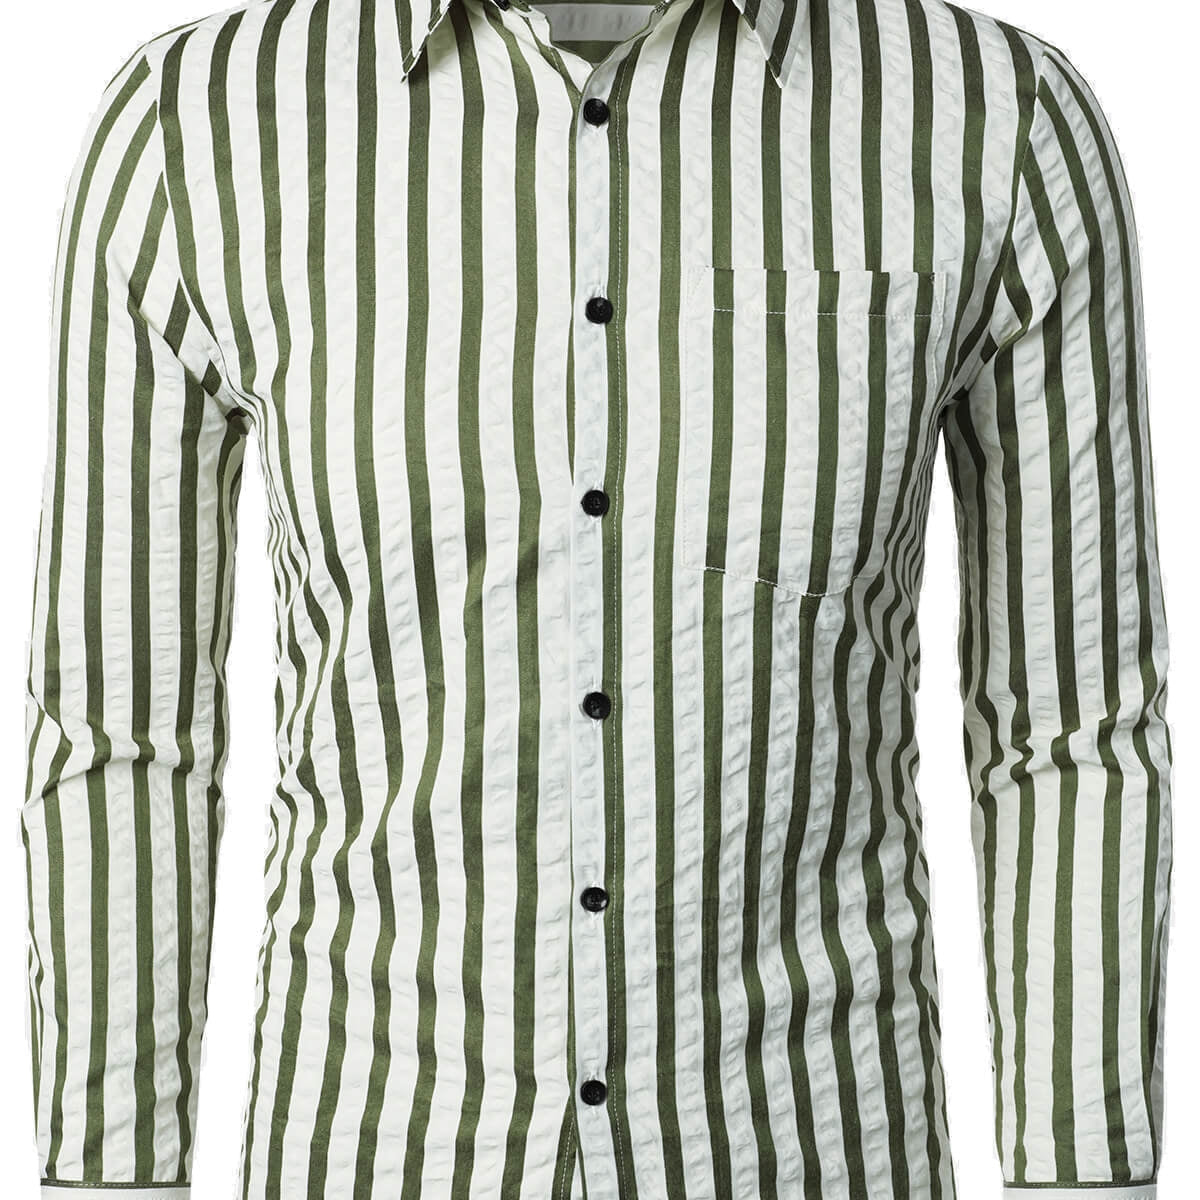 Men's Casual Striped Pocket Button Up Breathable Long Sleeve Shirt